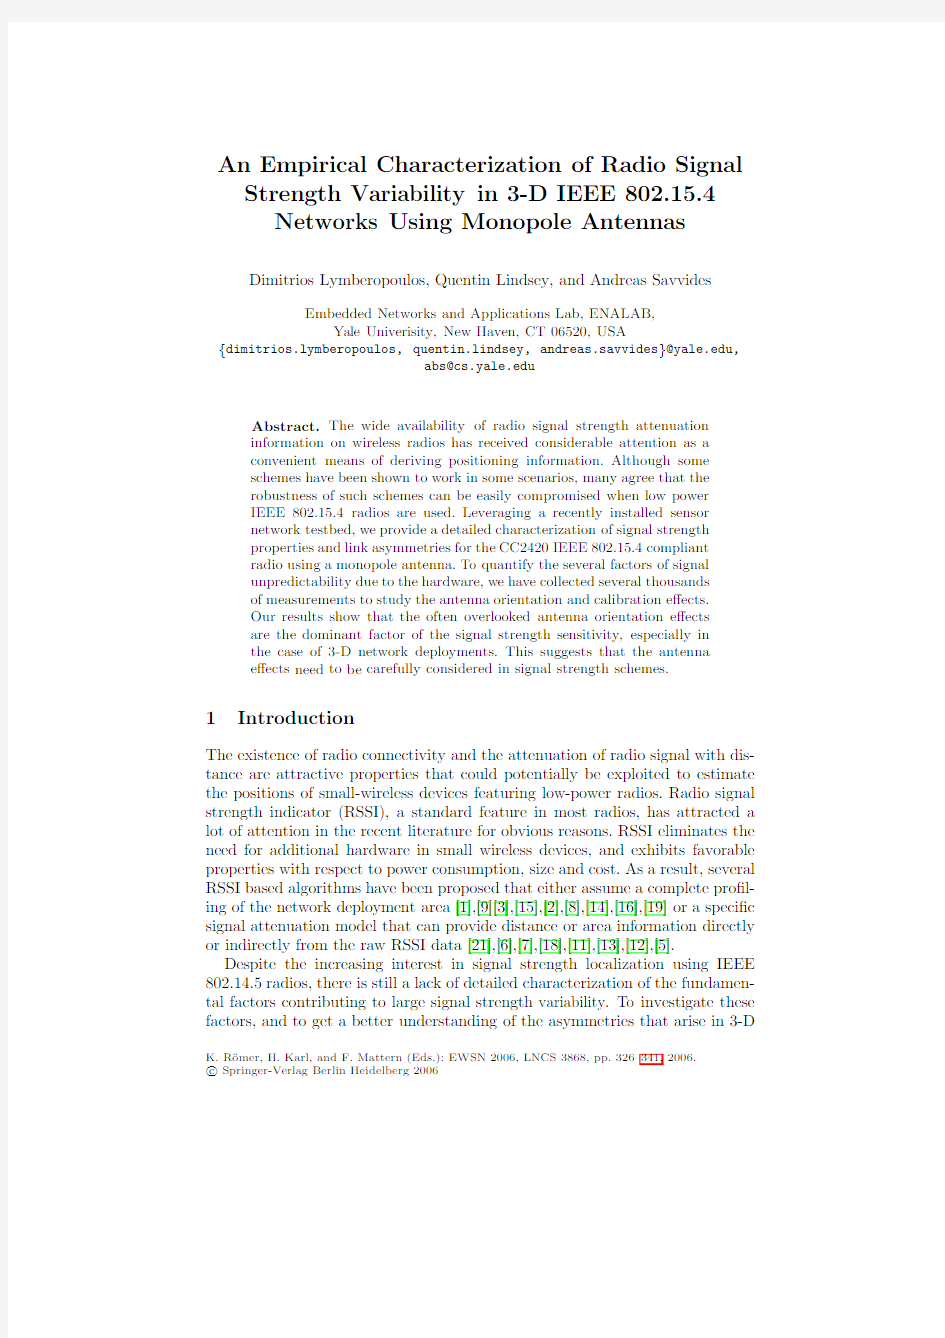 An Empirical Characterization of Radio Signal Strength Variability in 3-D IEEE 802.15.4 Net